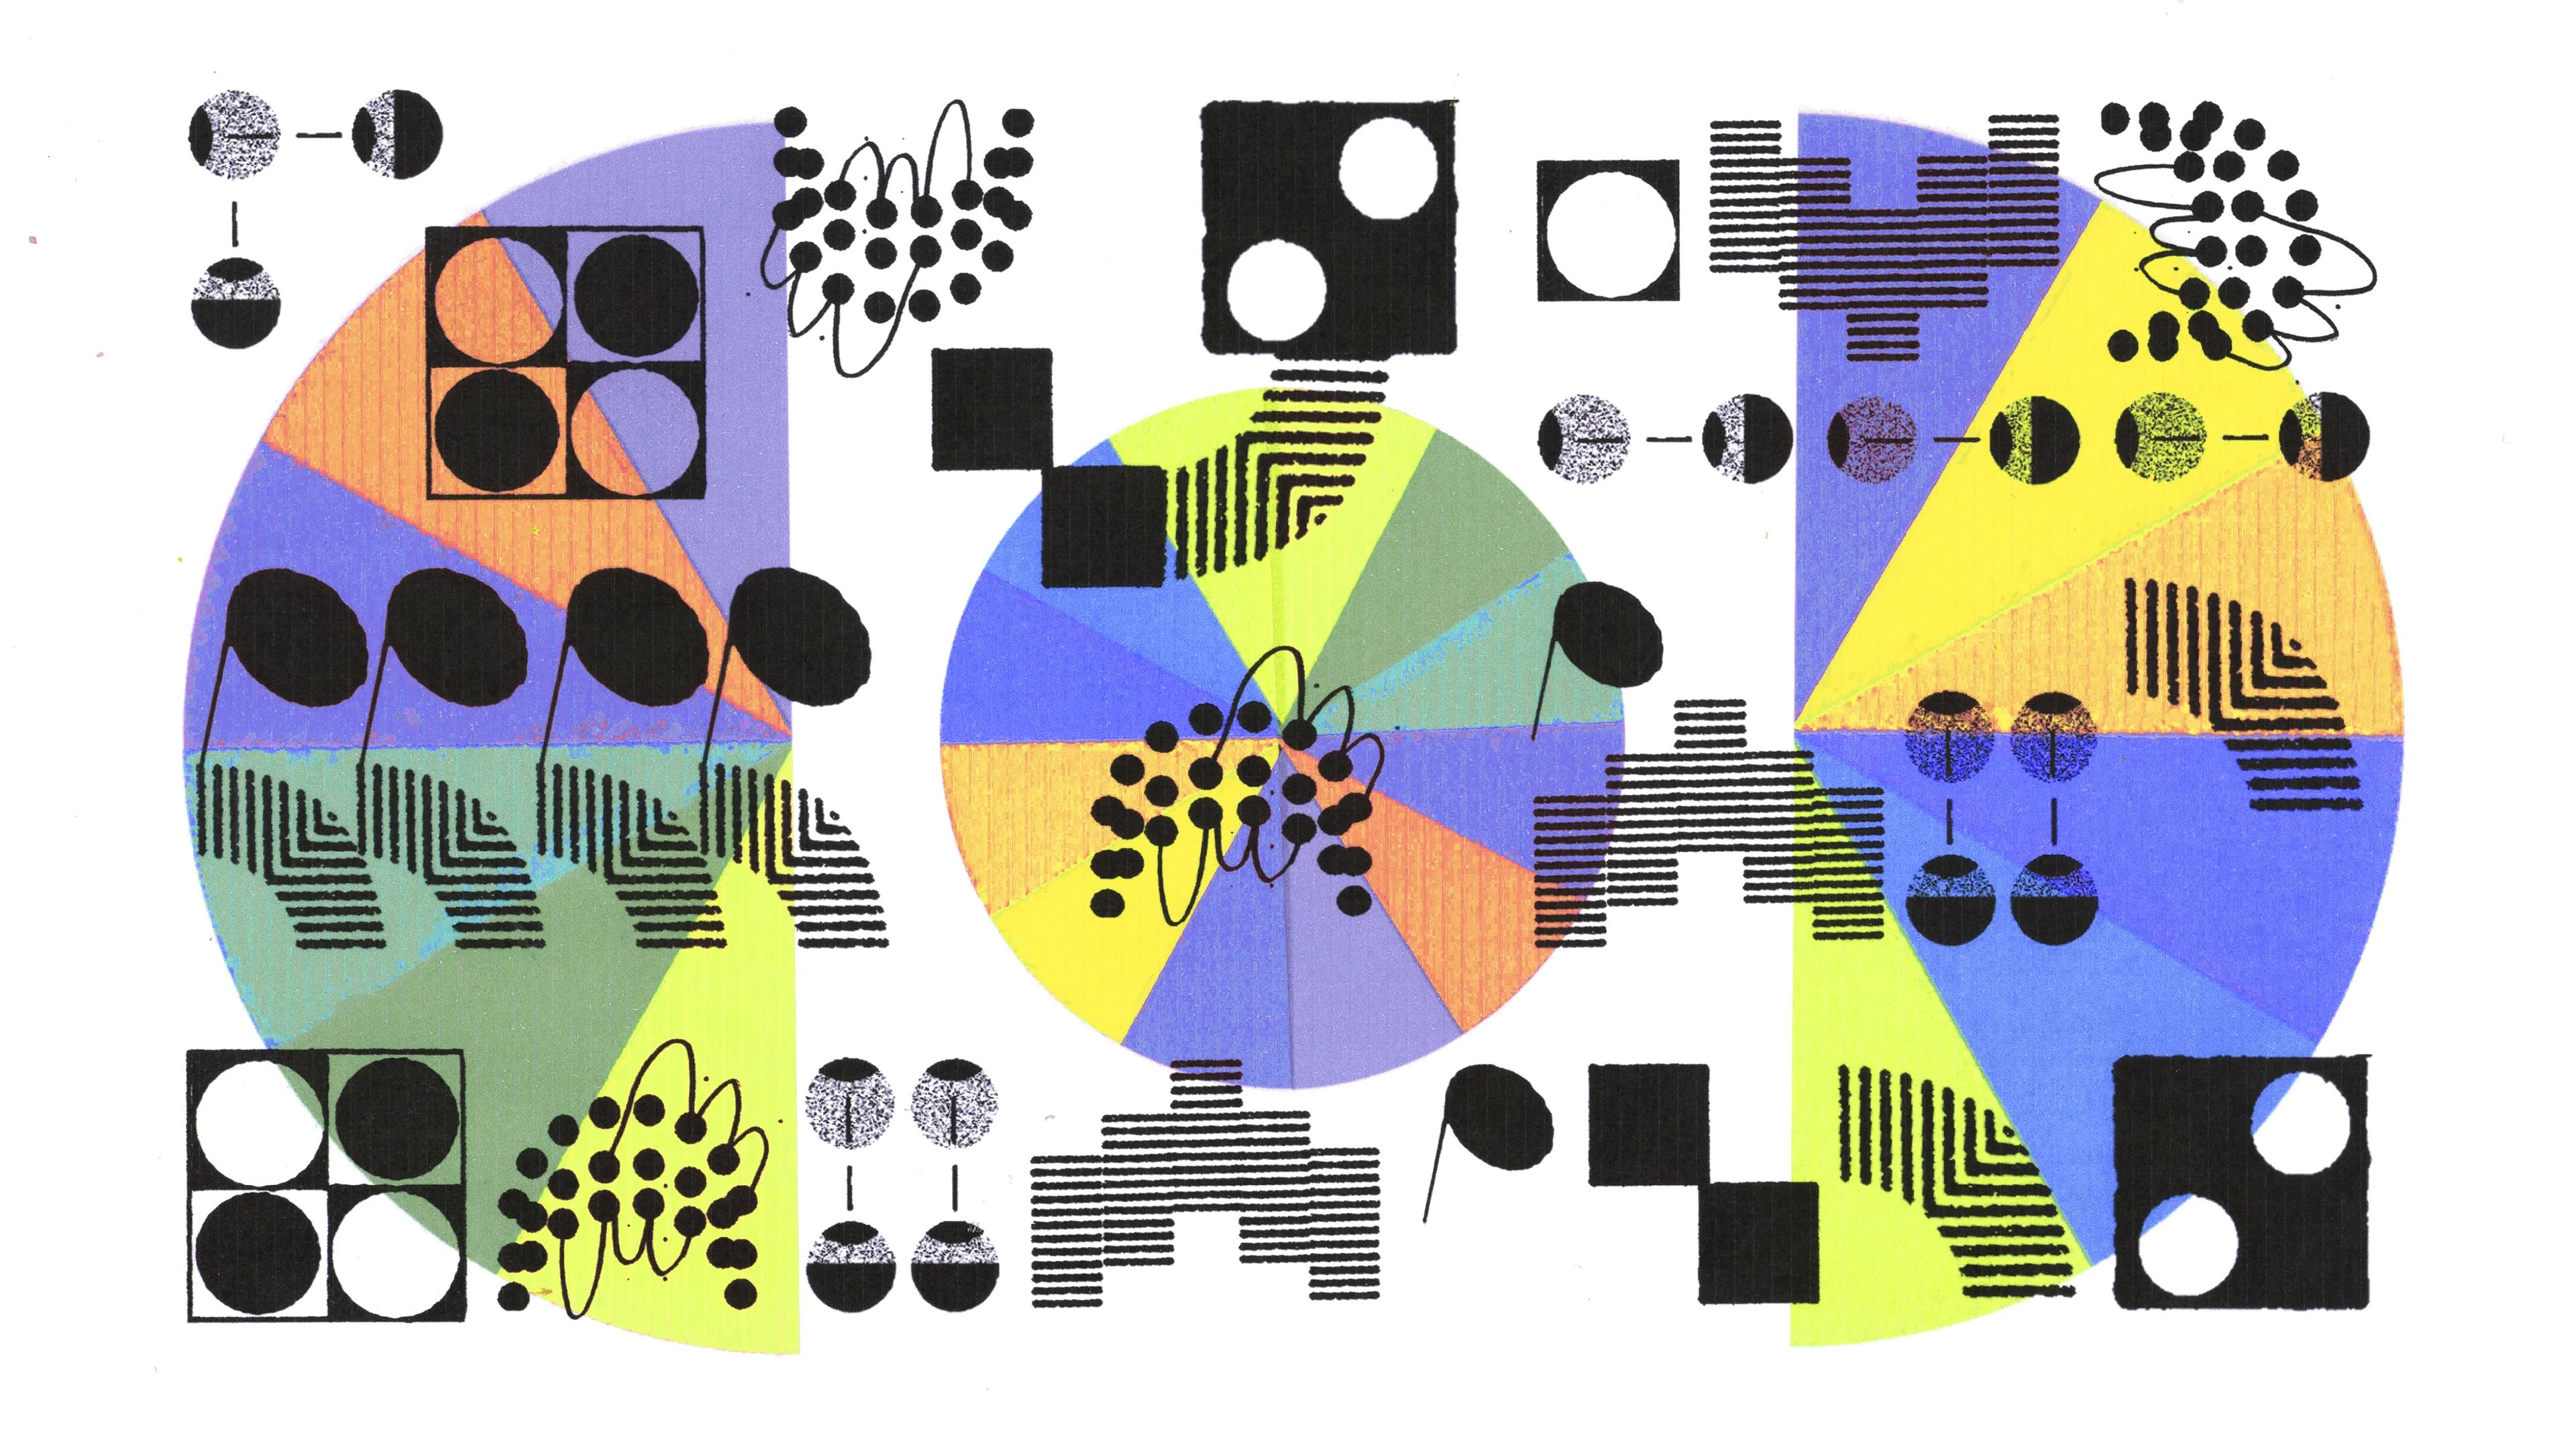 shapes and colors arranged to show a relationship between sound and visual media